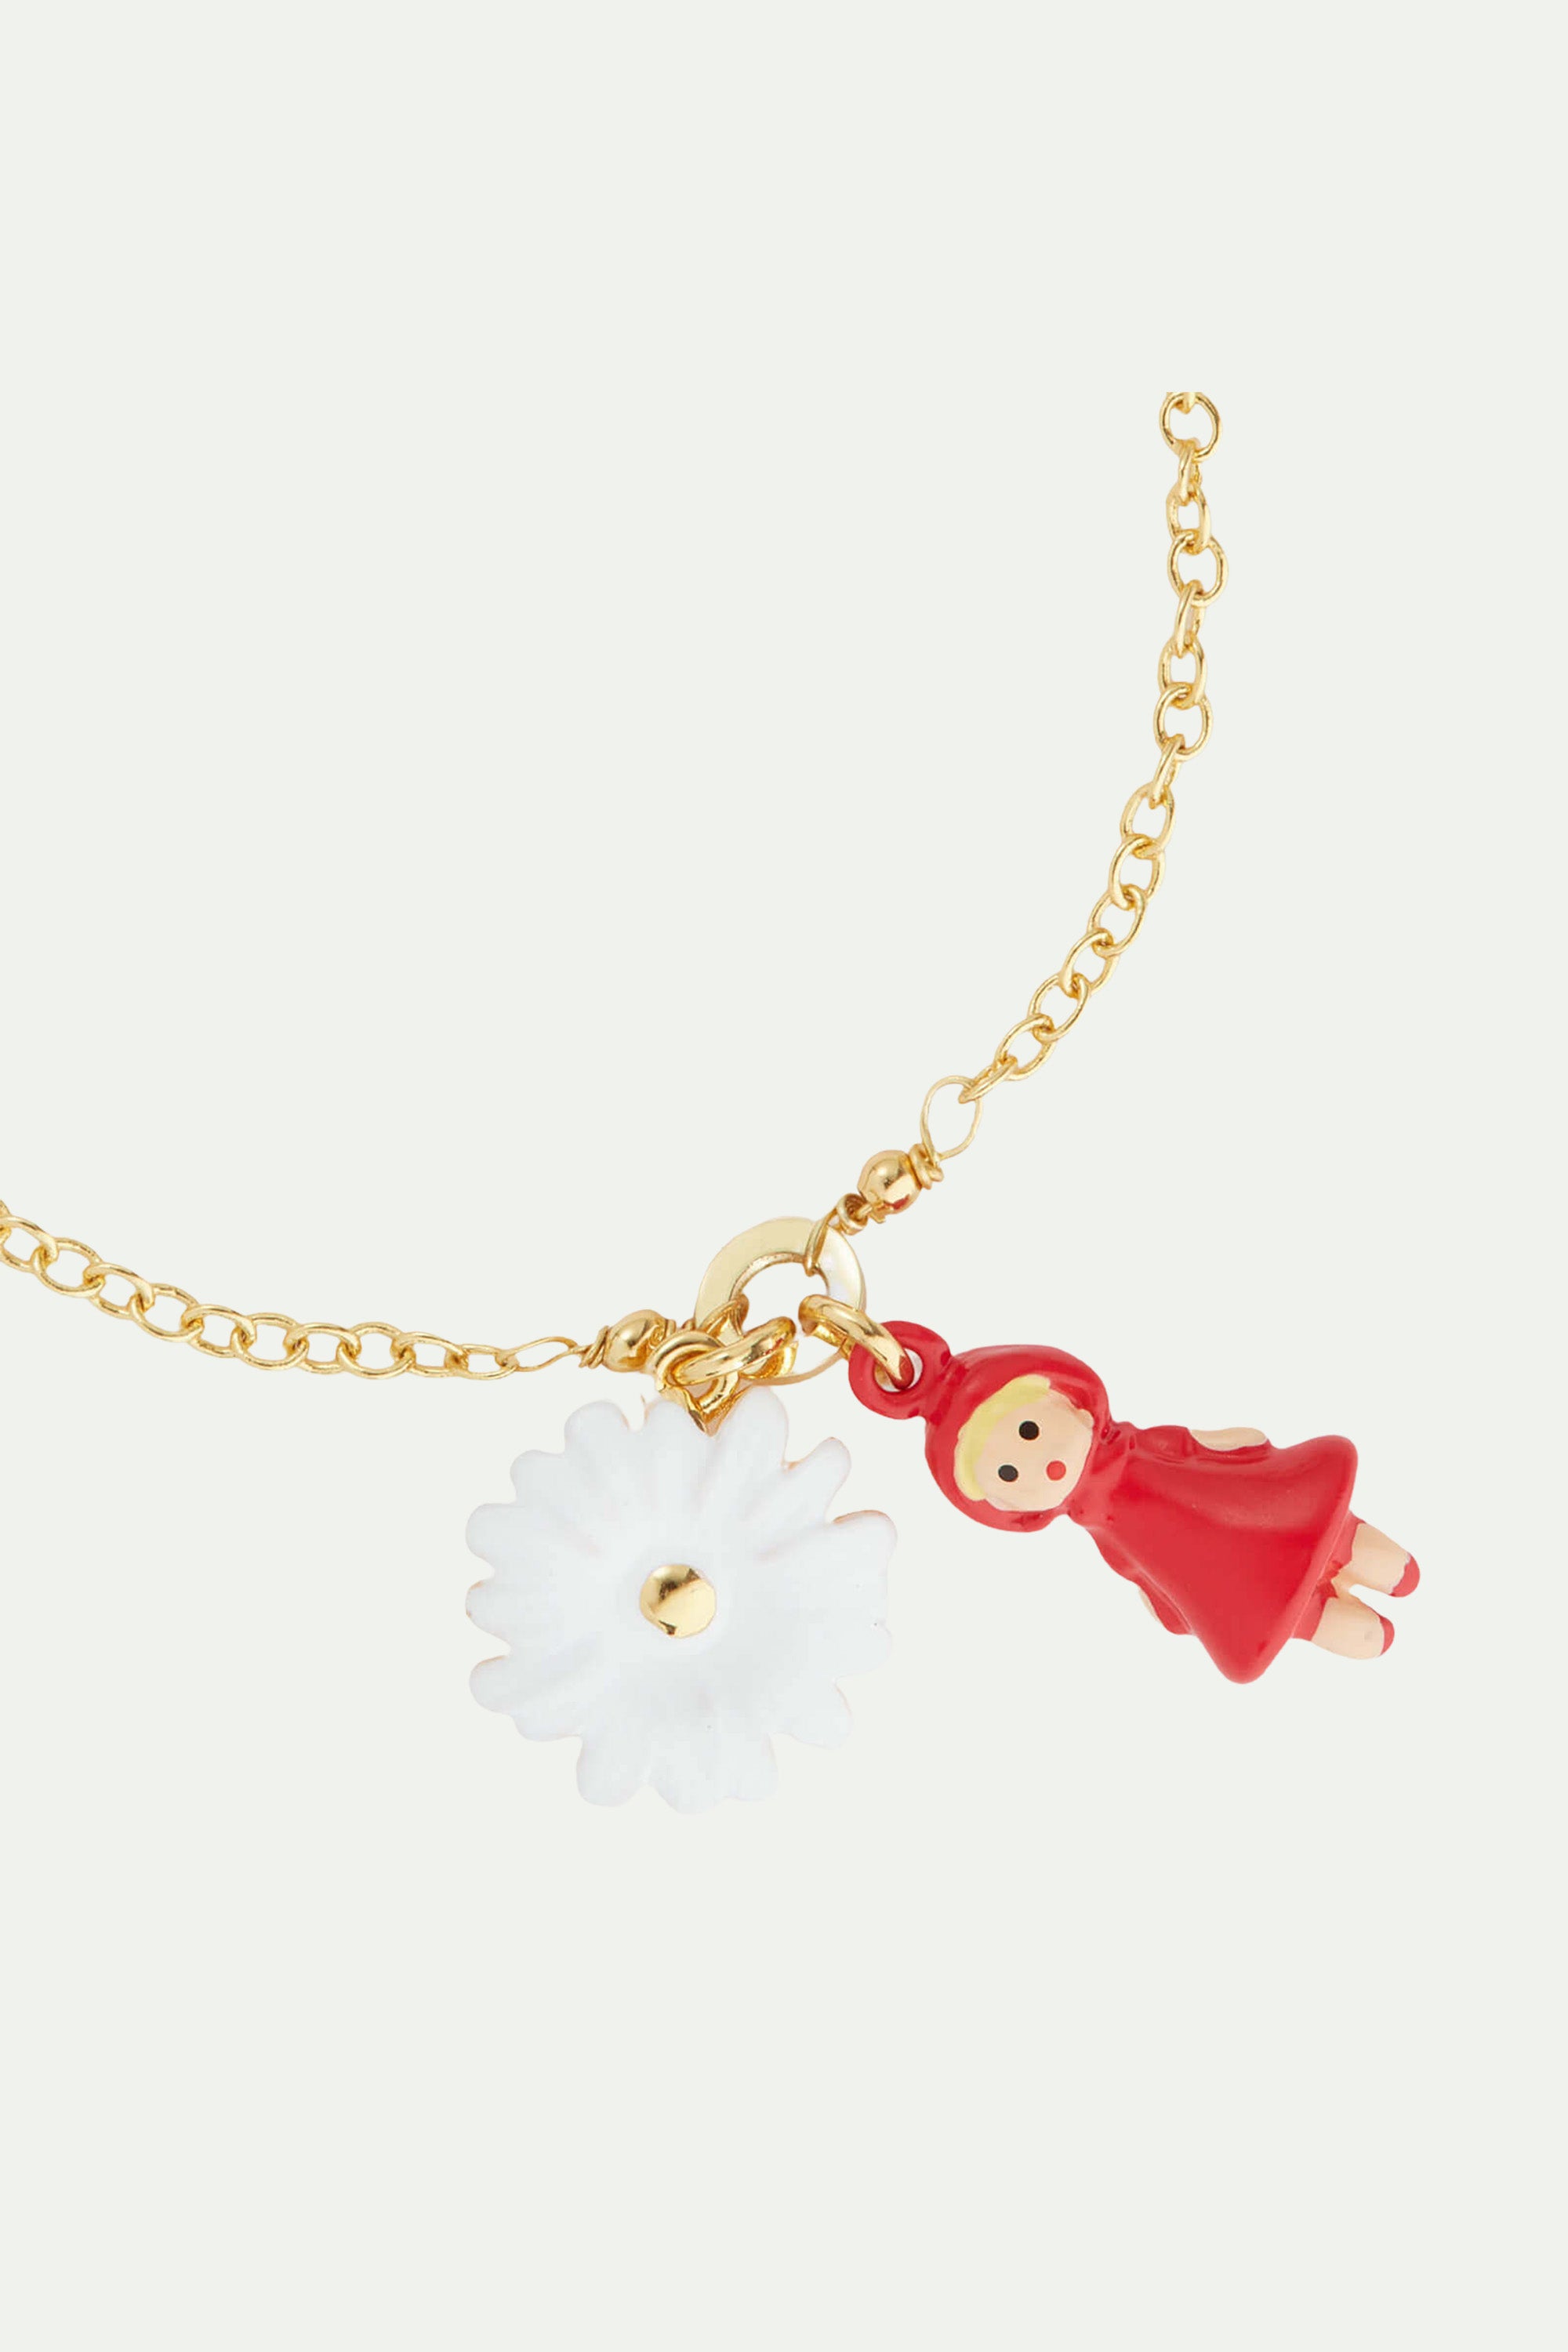 Daisy and Little Red Riding Hood charm bracelet